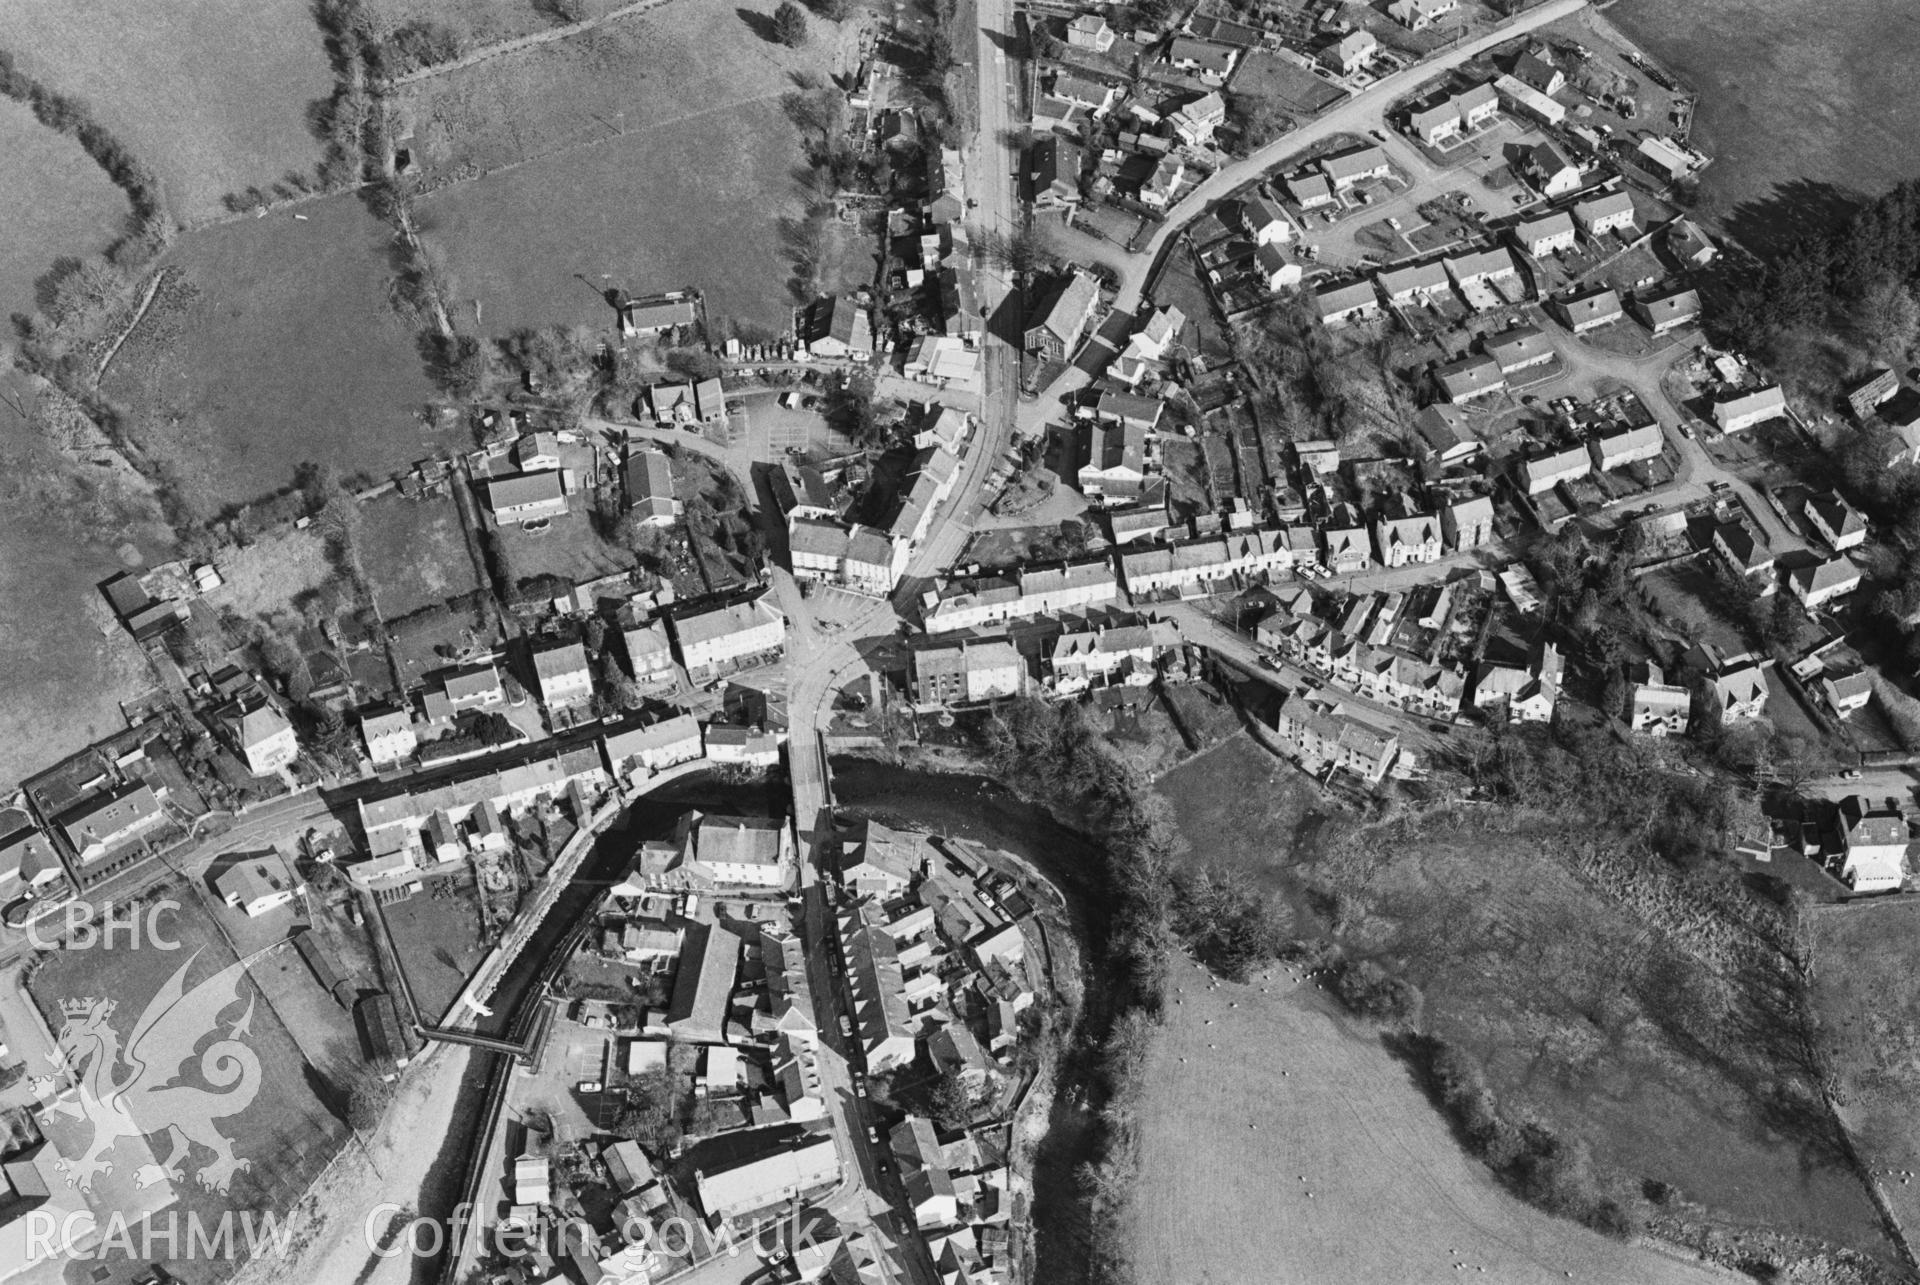 RCAHMW Black and white oblique aerial photograph of Llanwrtyd Wells, by Toby Driver, 2001.